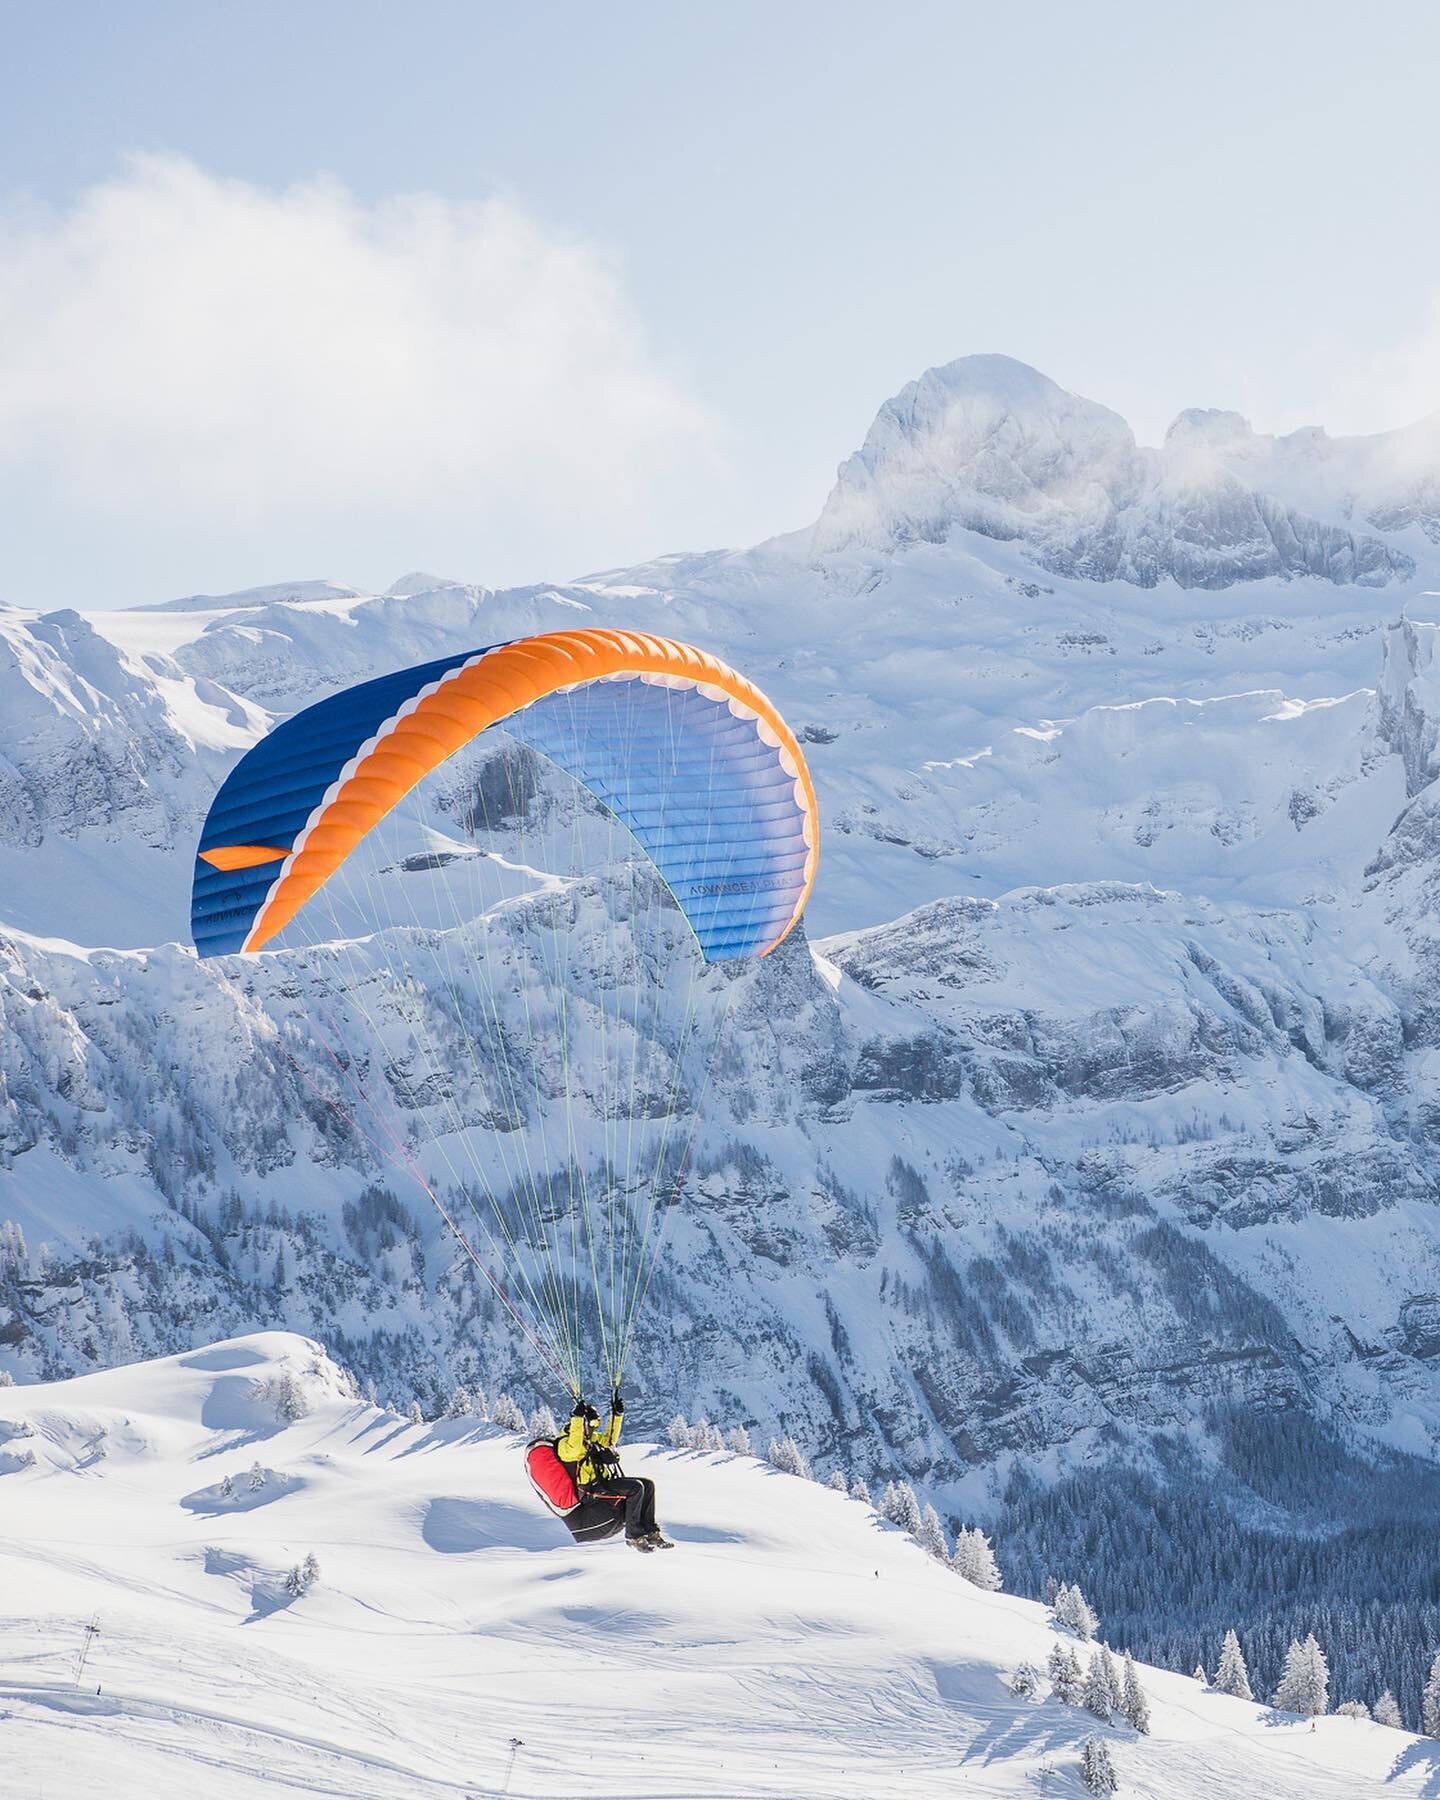 Short flashback to a great winter ❄️ because of the current bad weather 🙈 Have a good Weekend! and let&rsquo;s hope for some sunny days soon again ☀️🇨🇭
.
.
.
#weroamtheworld #intothemountains #myswitzerland #swissmountains #swissalps #paragliging 